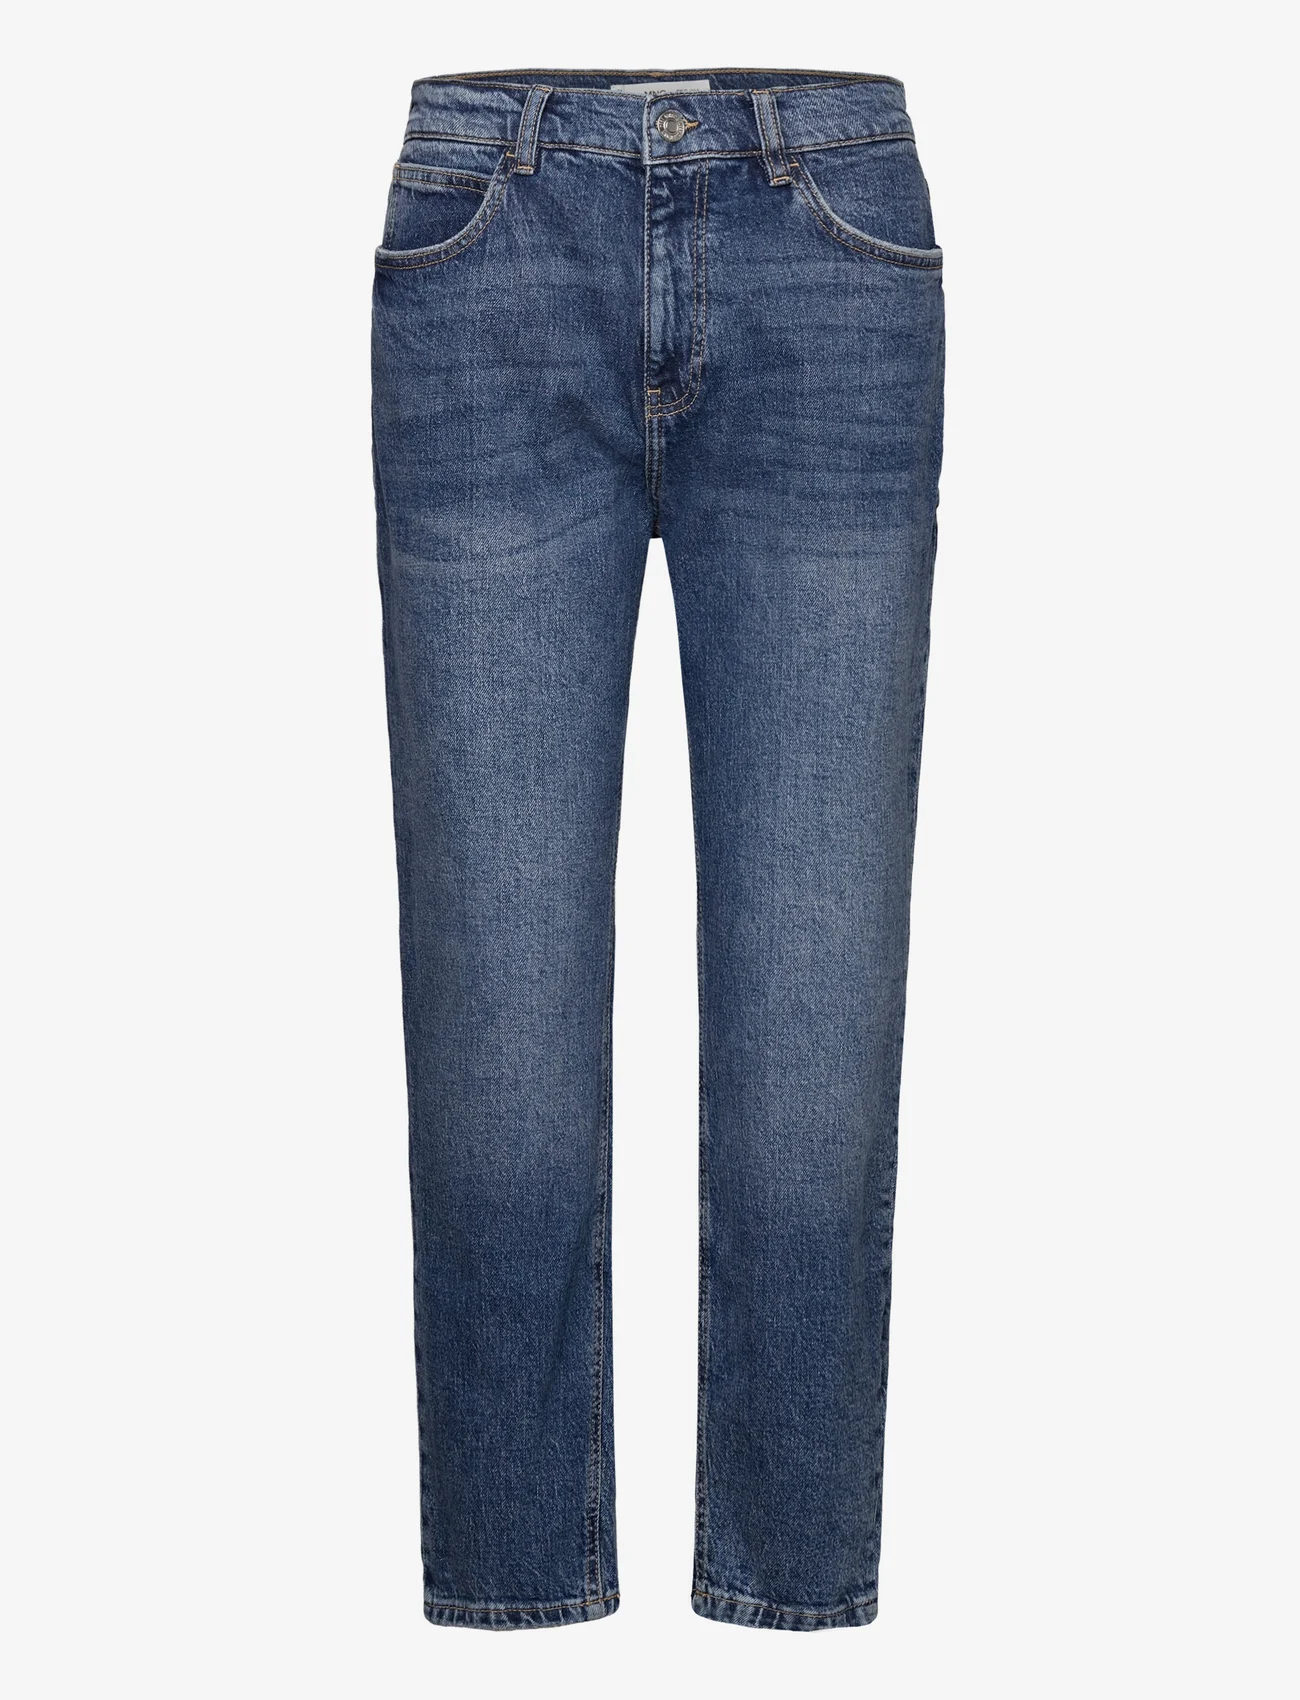 Mango - Mom comfort high-rise jeans - mom jeans - open blue - 0